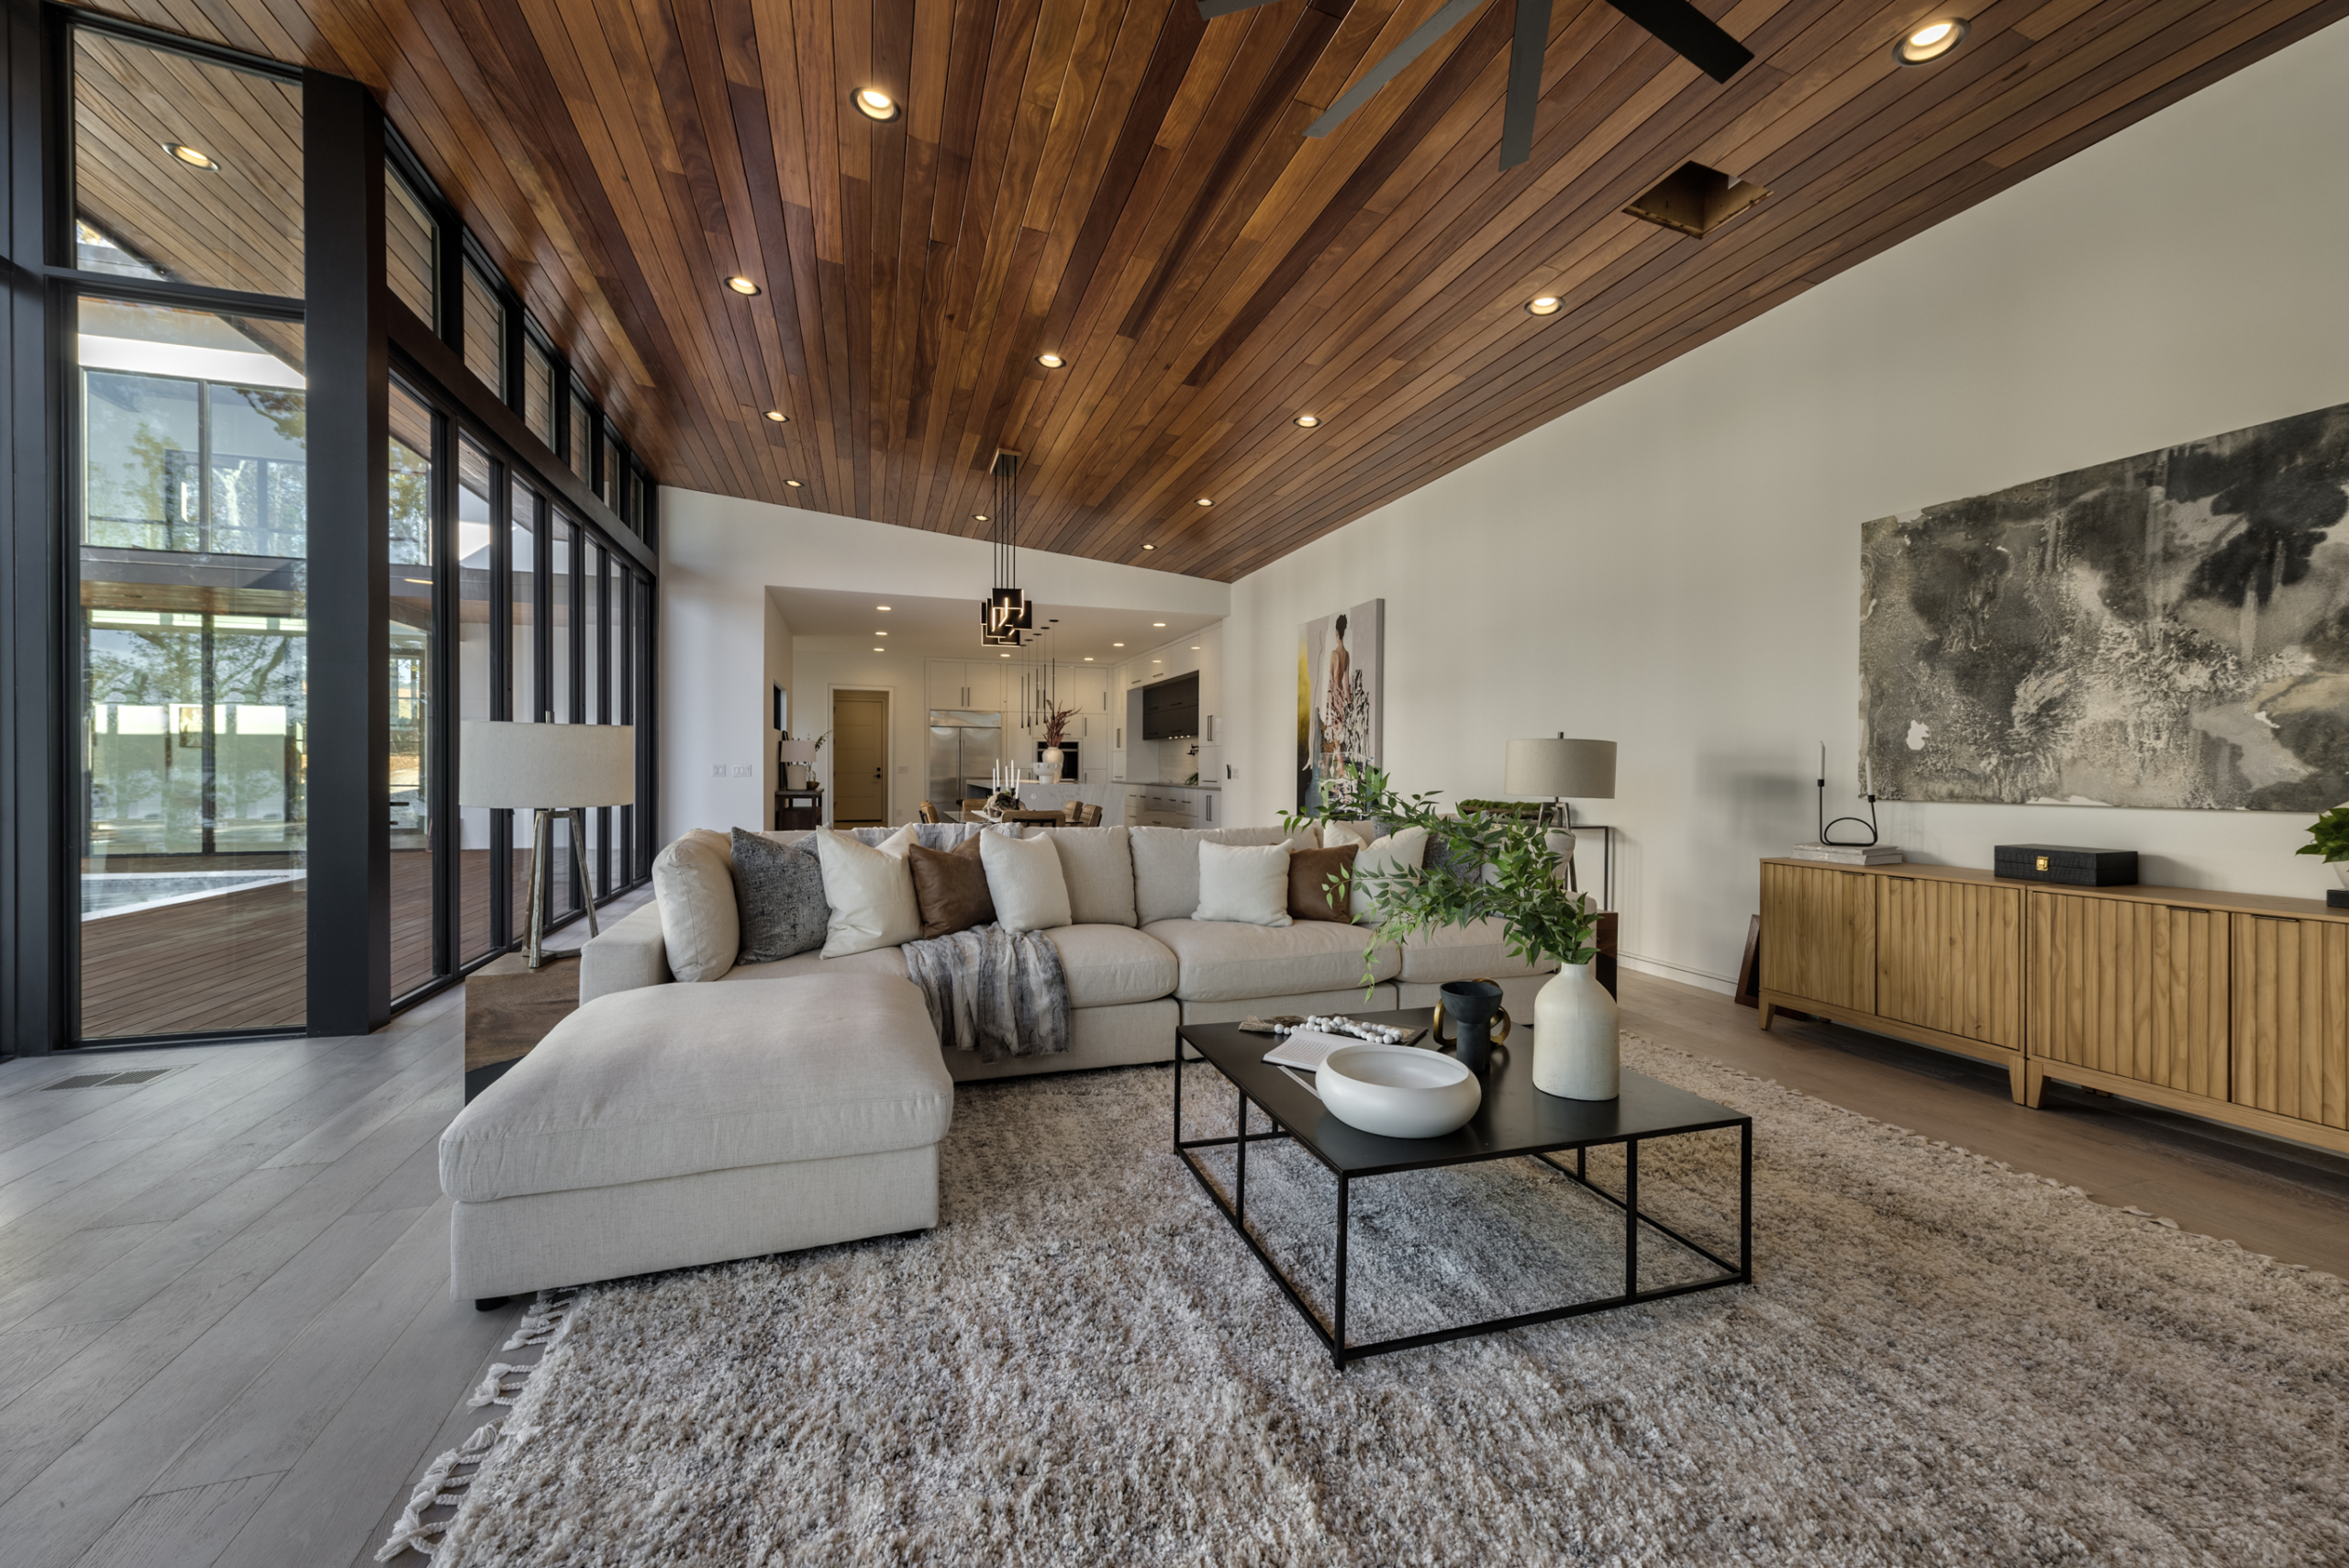 Contemporary living room with wood cumaru ceiling and folding glass wall